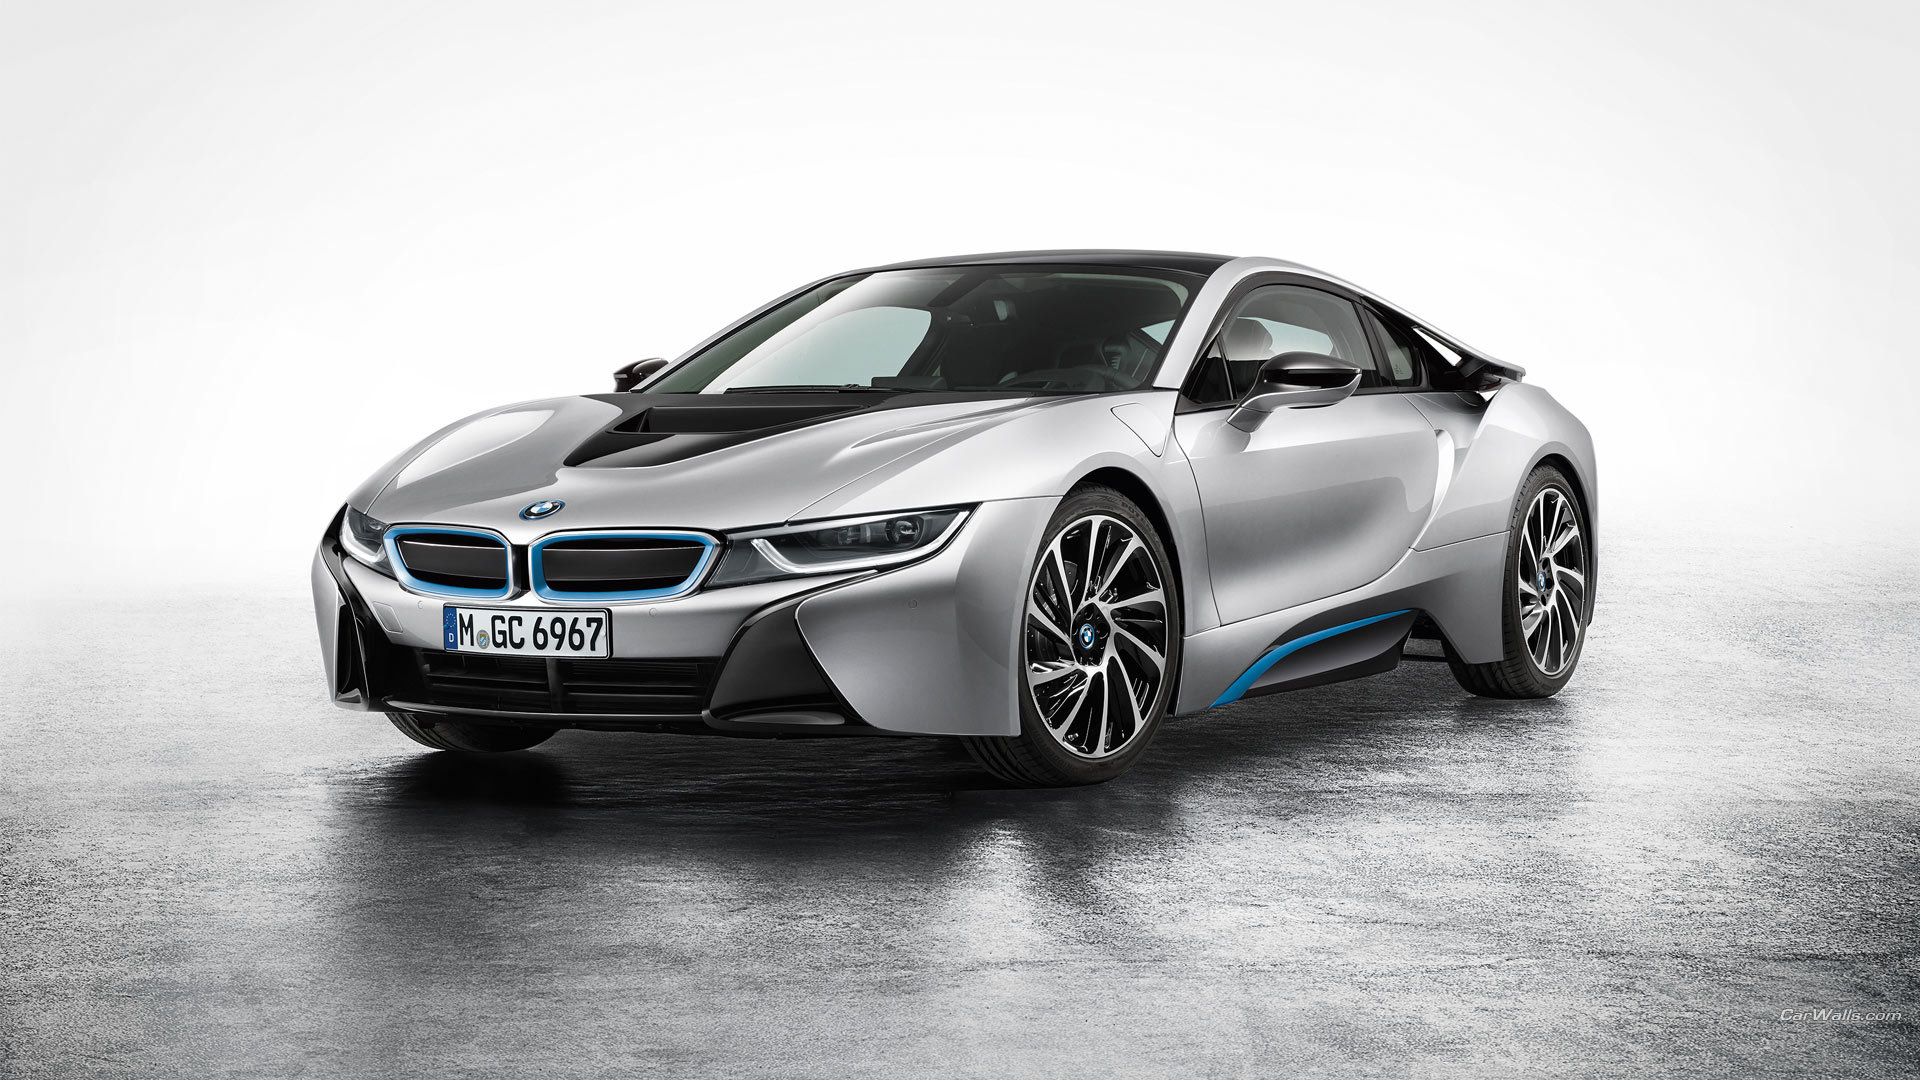 Awesome BMW I8 free wallpaper ID:126941 for full hd computer